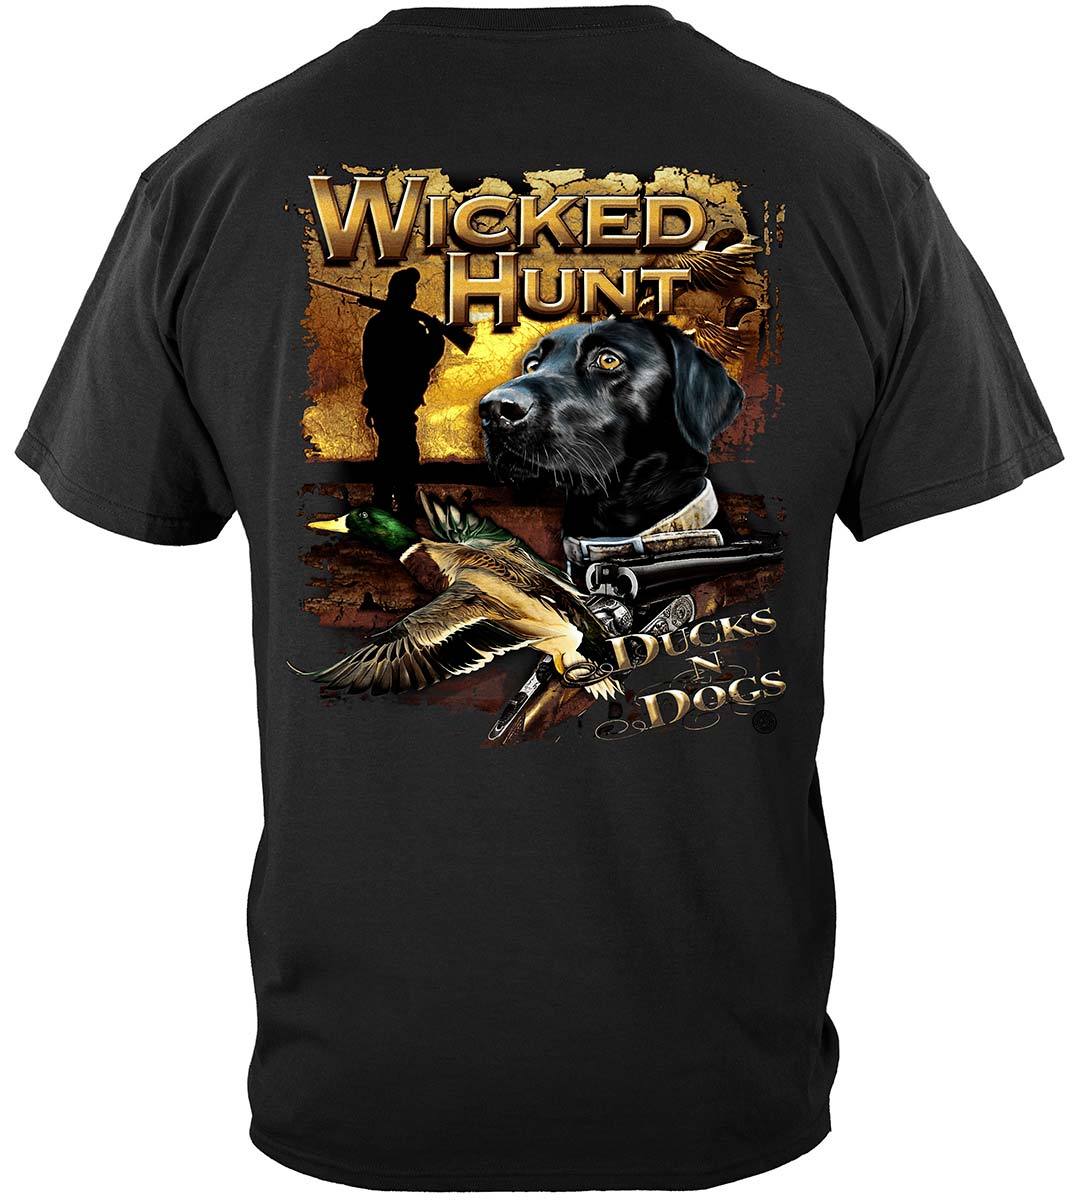 Wicked Hunt Ducks And Dogs Premium Long Sleeves